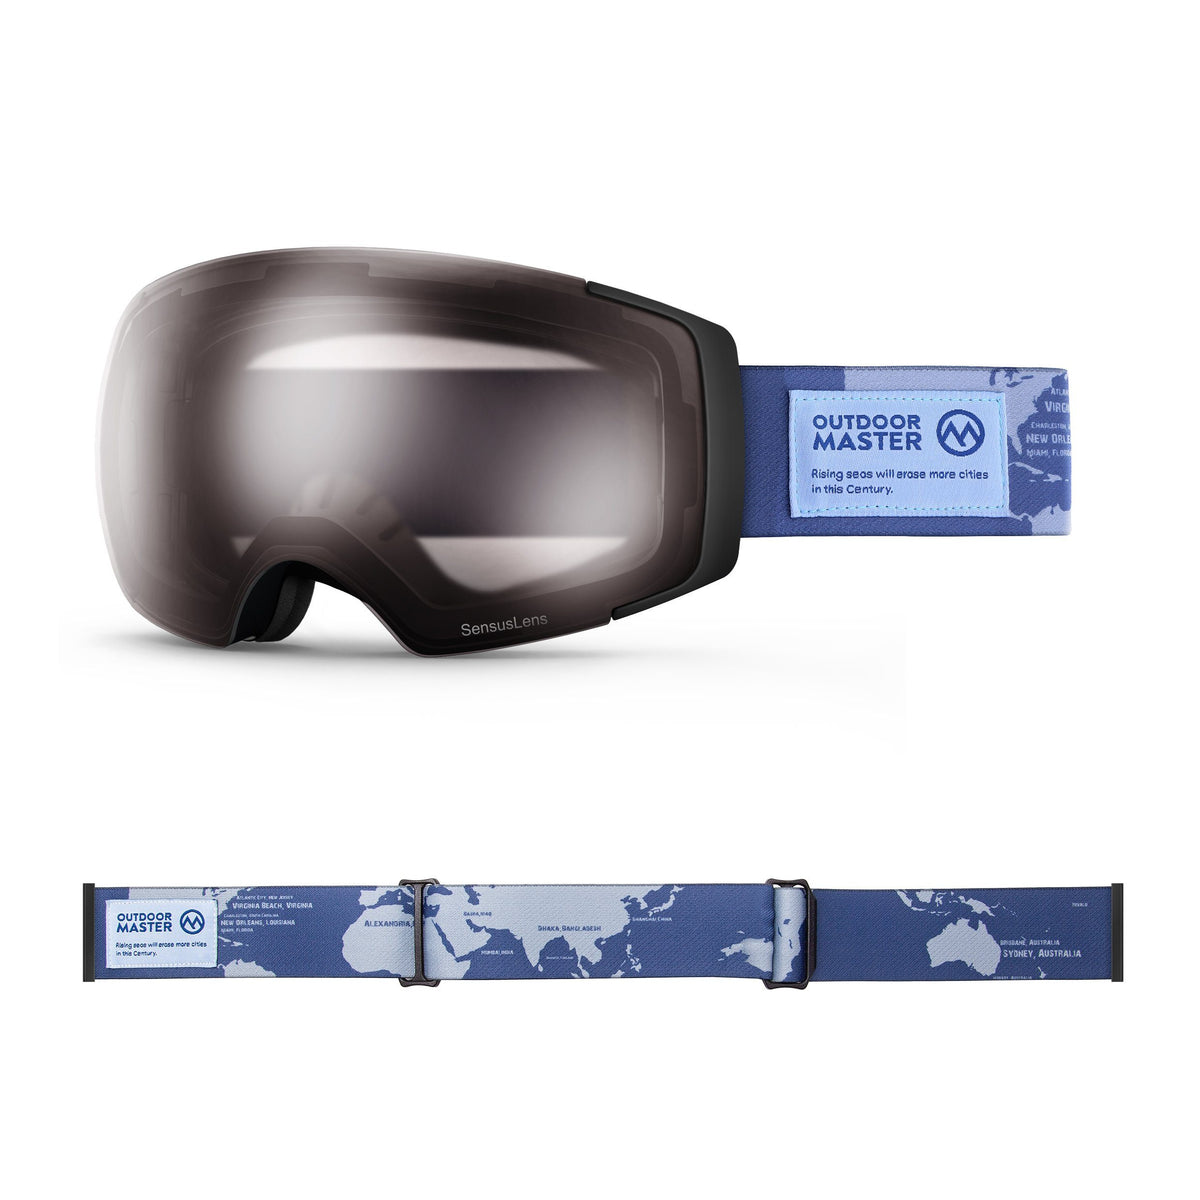 Eco-friendly Ski Goggles Pro Series - The Disappearing Places/Classic BambooStraps Limited Edition OutdoorMaster SensusLens VLT40-80% Photochromatic Clear to Pink The Disappearing Places